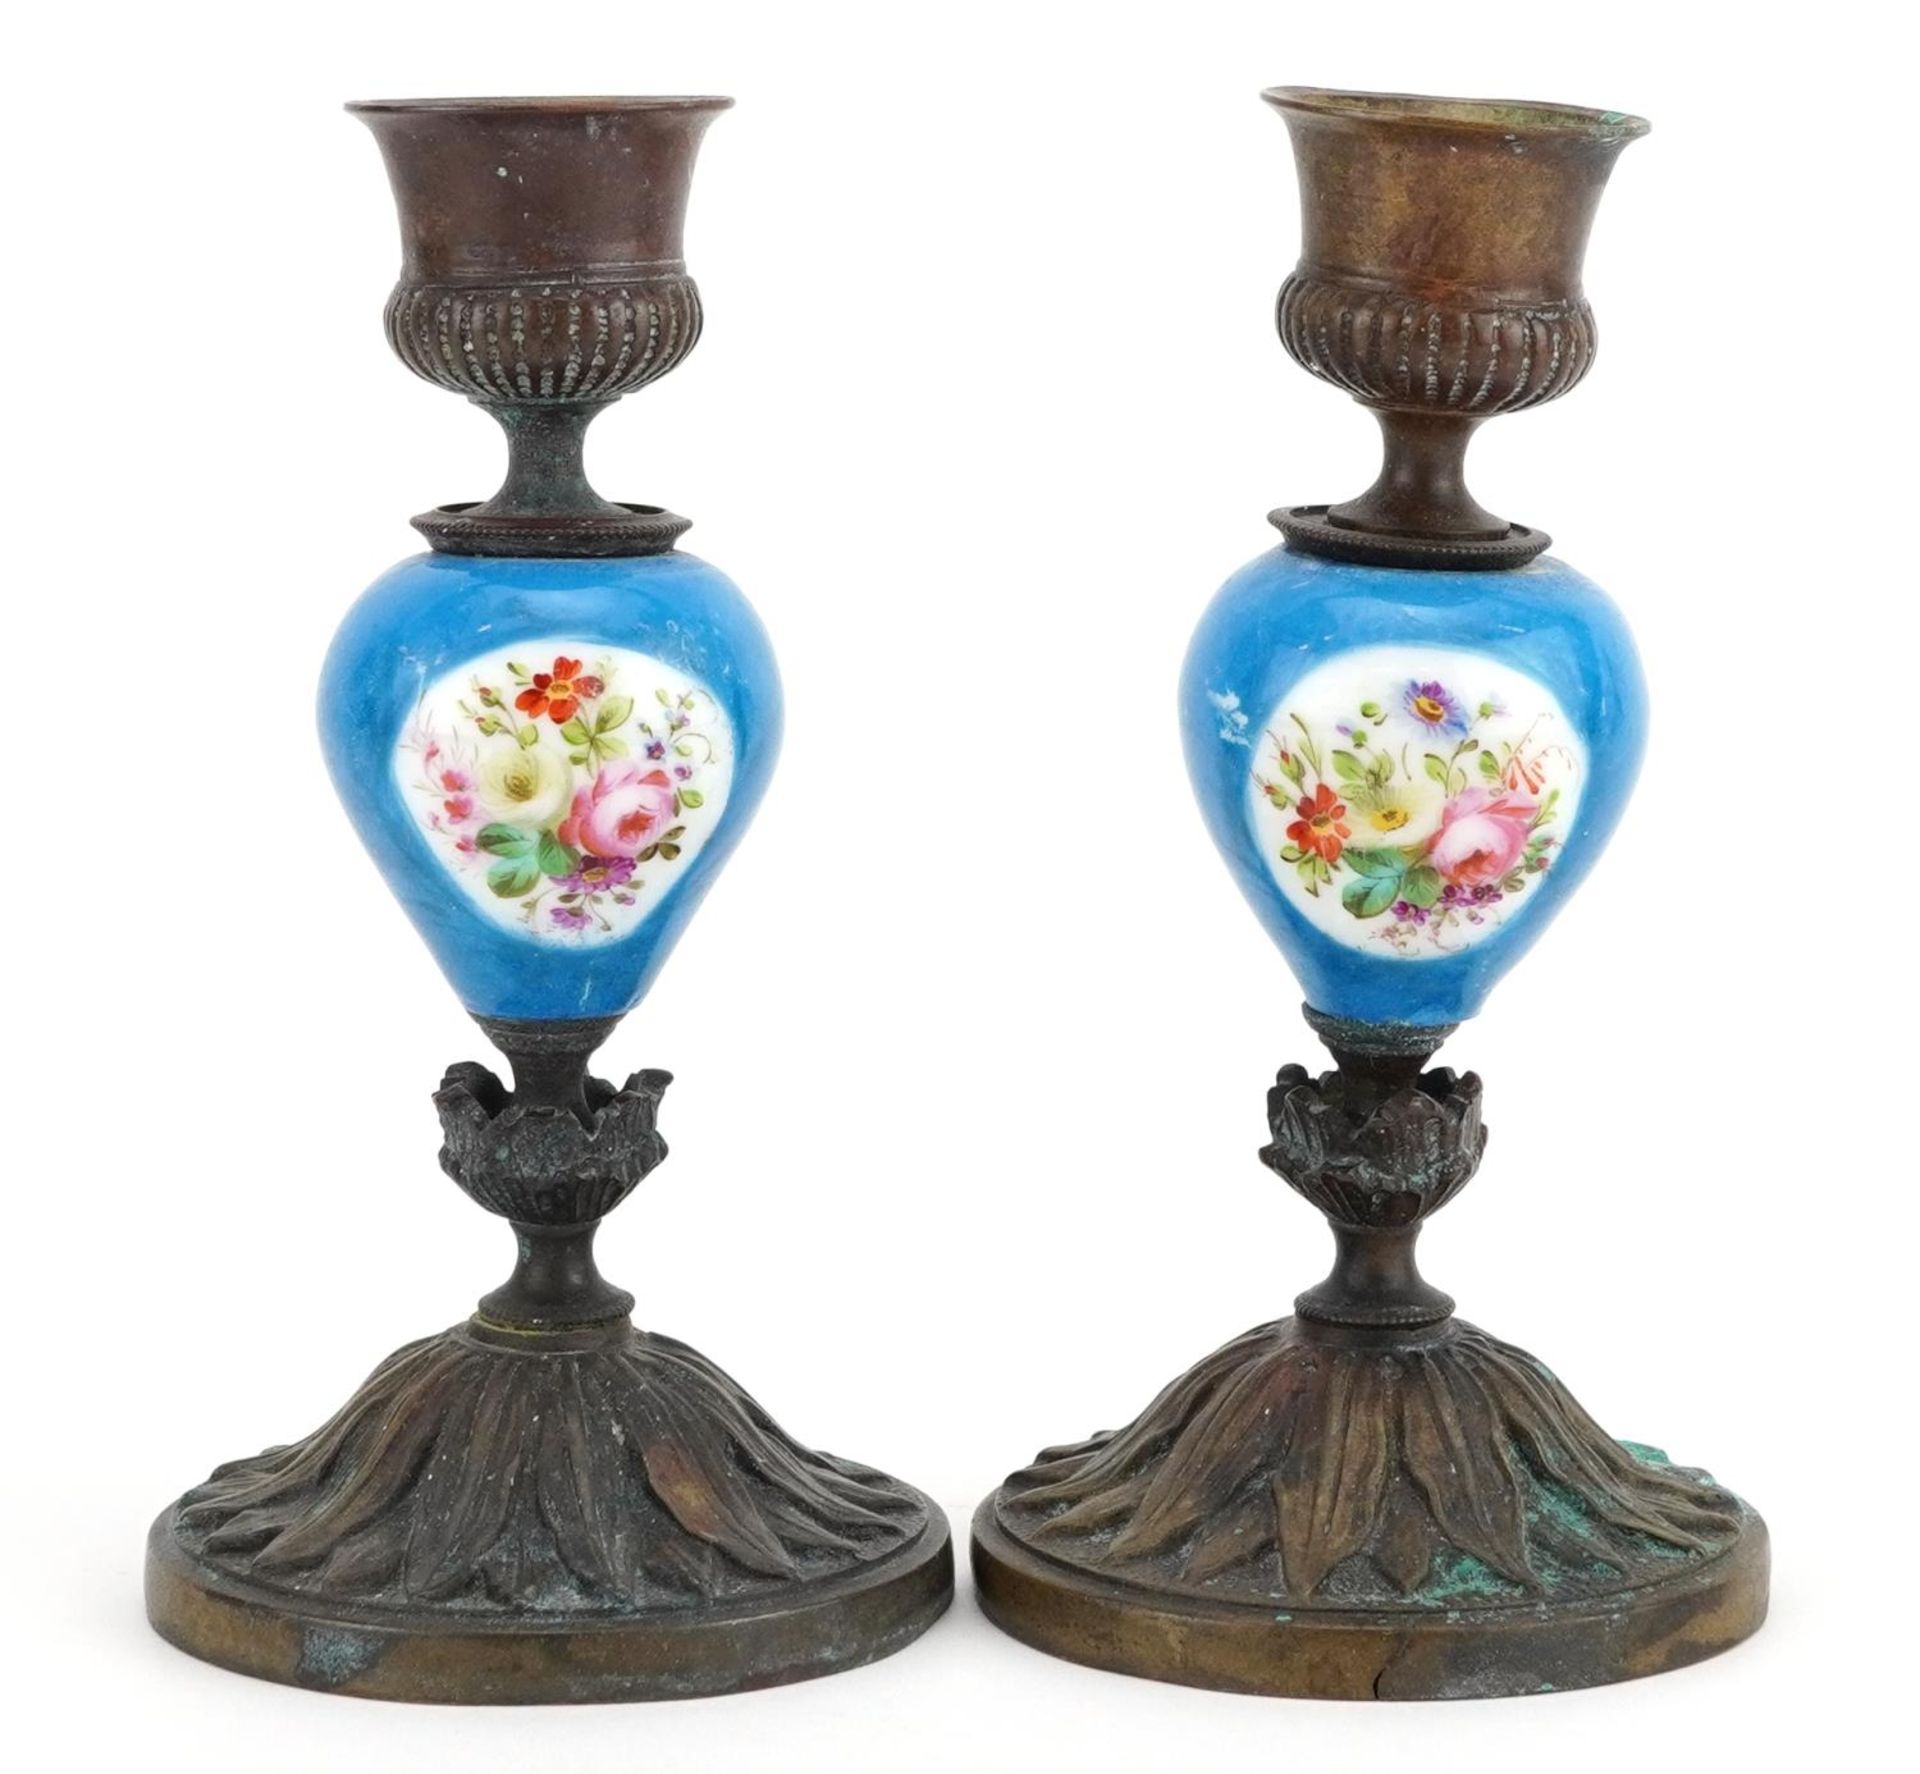 Pair of French style bronze candlesticks with Sevres type porcelain columns hand painted with